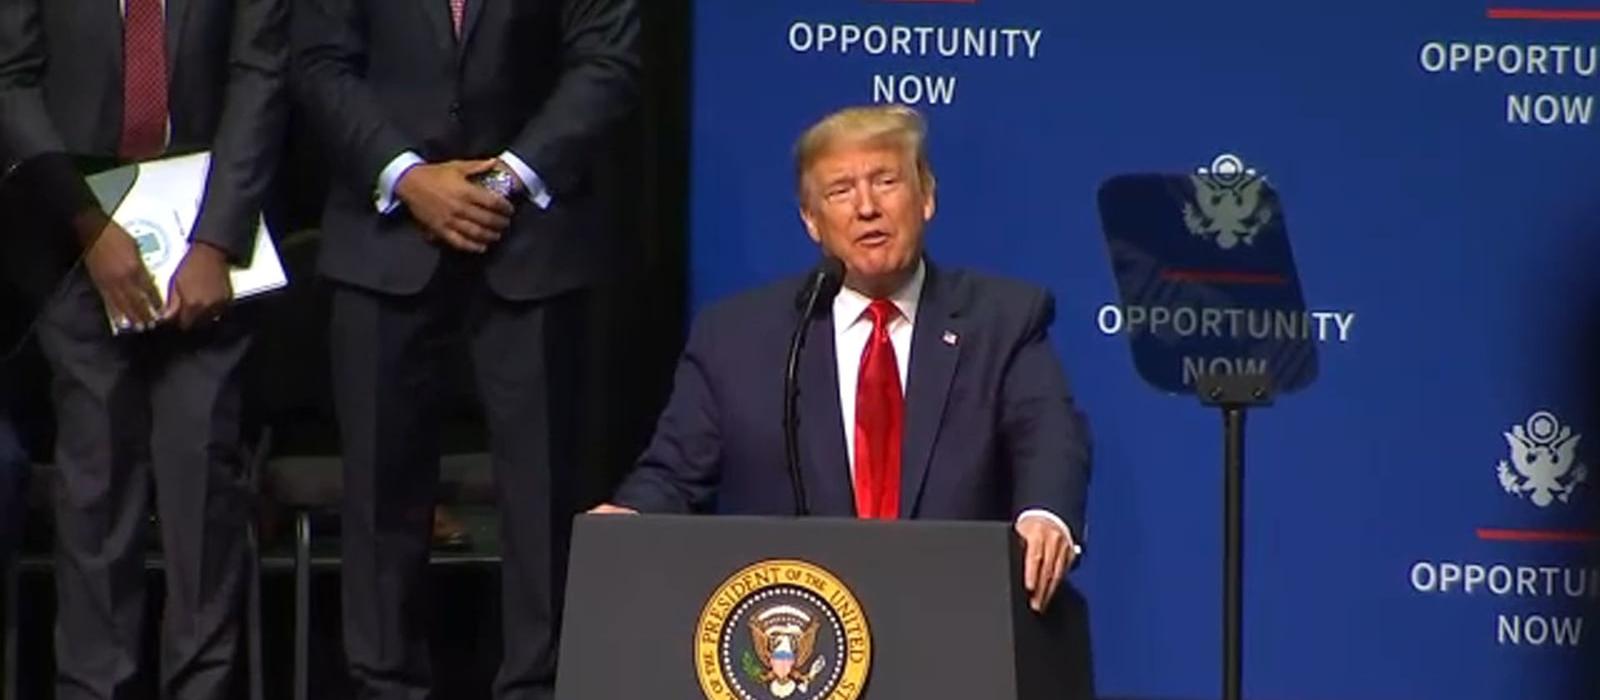 President Trump at Opportunity Now Summit